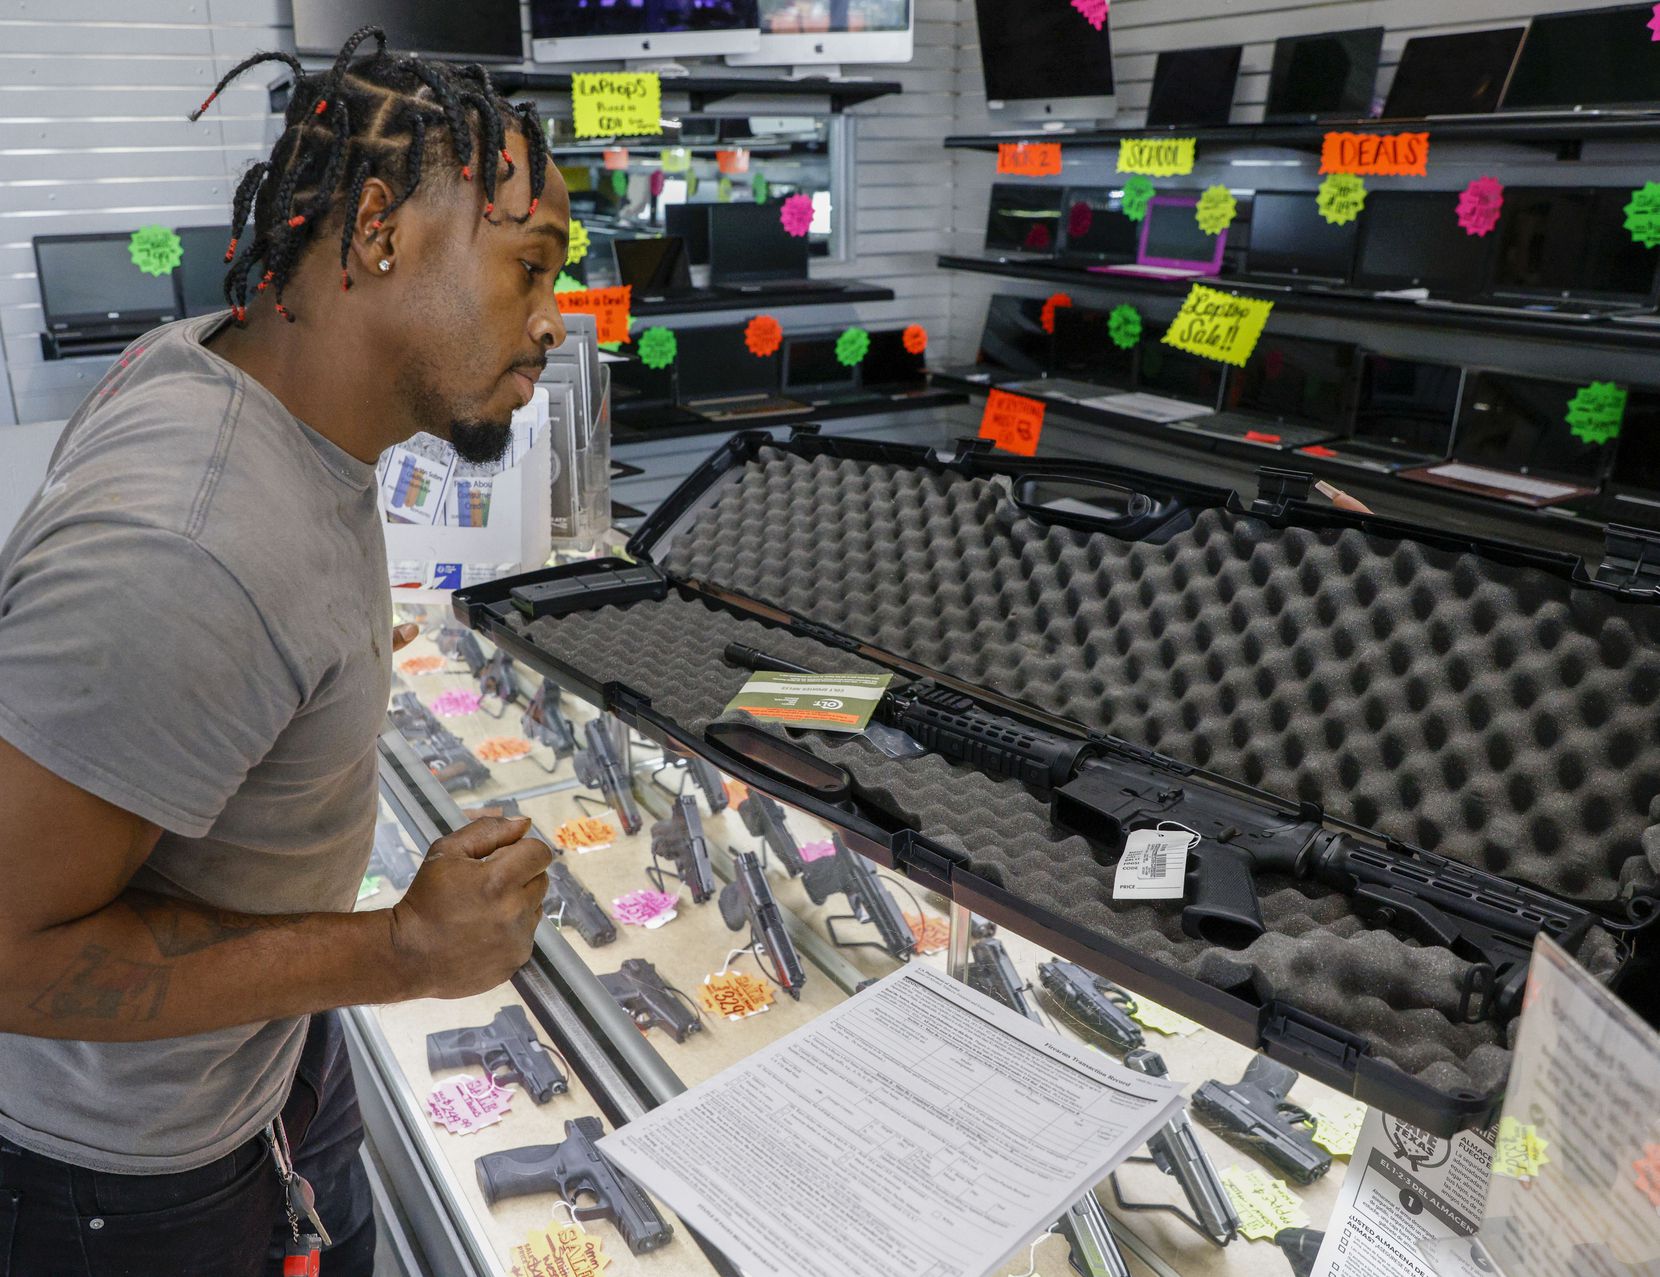 Brian Benford, 31, looks at a Colt rifle while shopping at Uncle Dan’s Pawn Shop in...